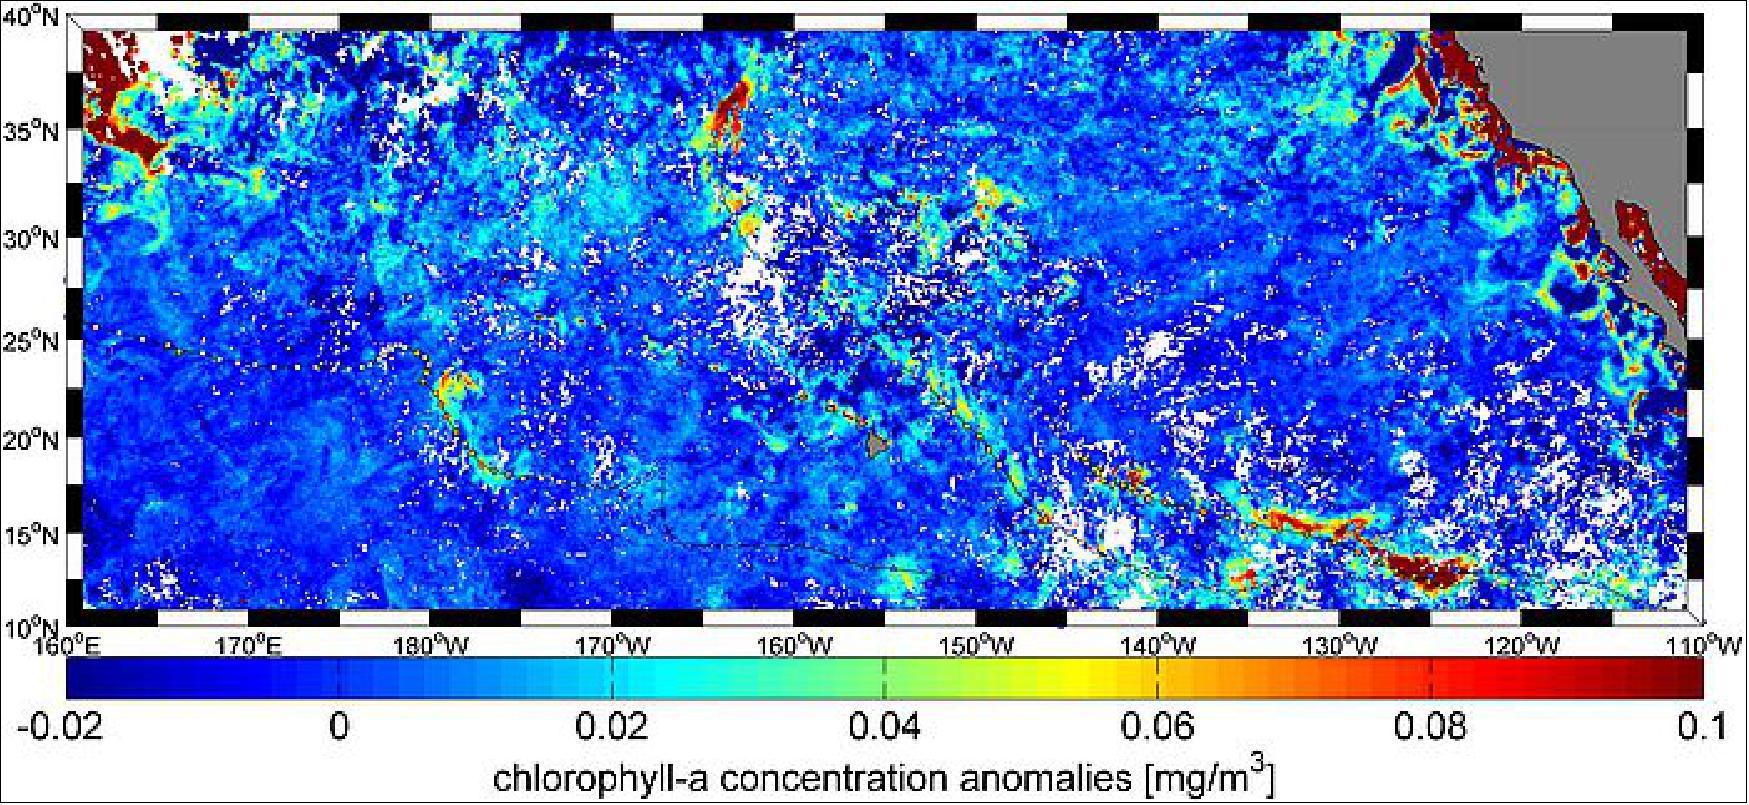 Figure 63: Changes in chlorophyll concentration as shown by SMOS observations (image credit: Ifremer–N. Reul/ESA SMOS+STORM project/NASA/GSFC/OBPG, Ref. 69)